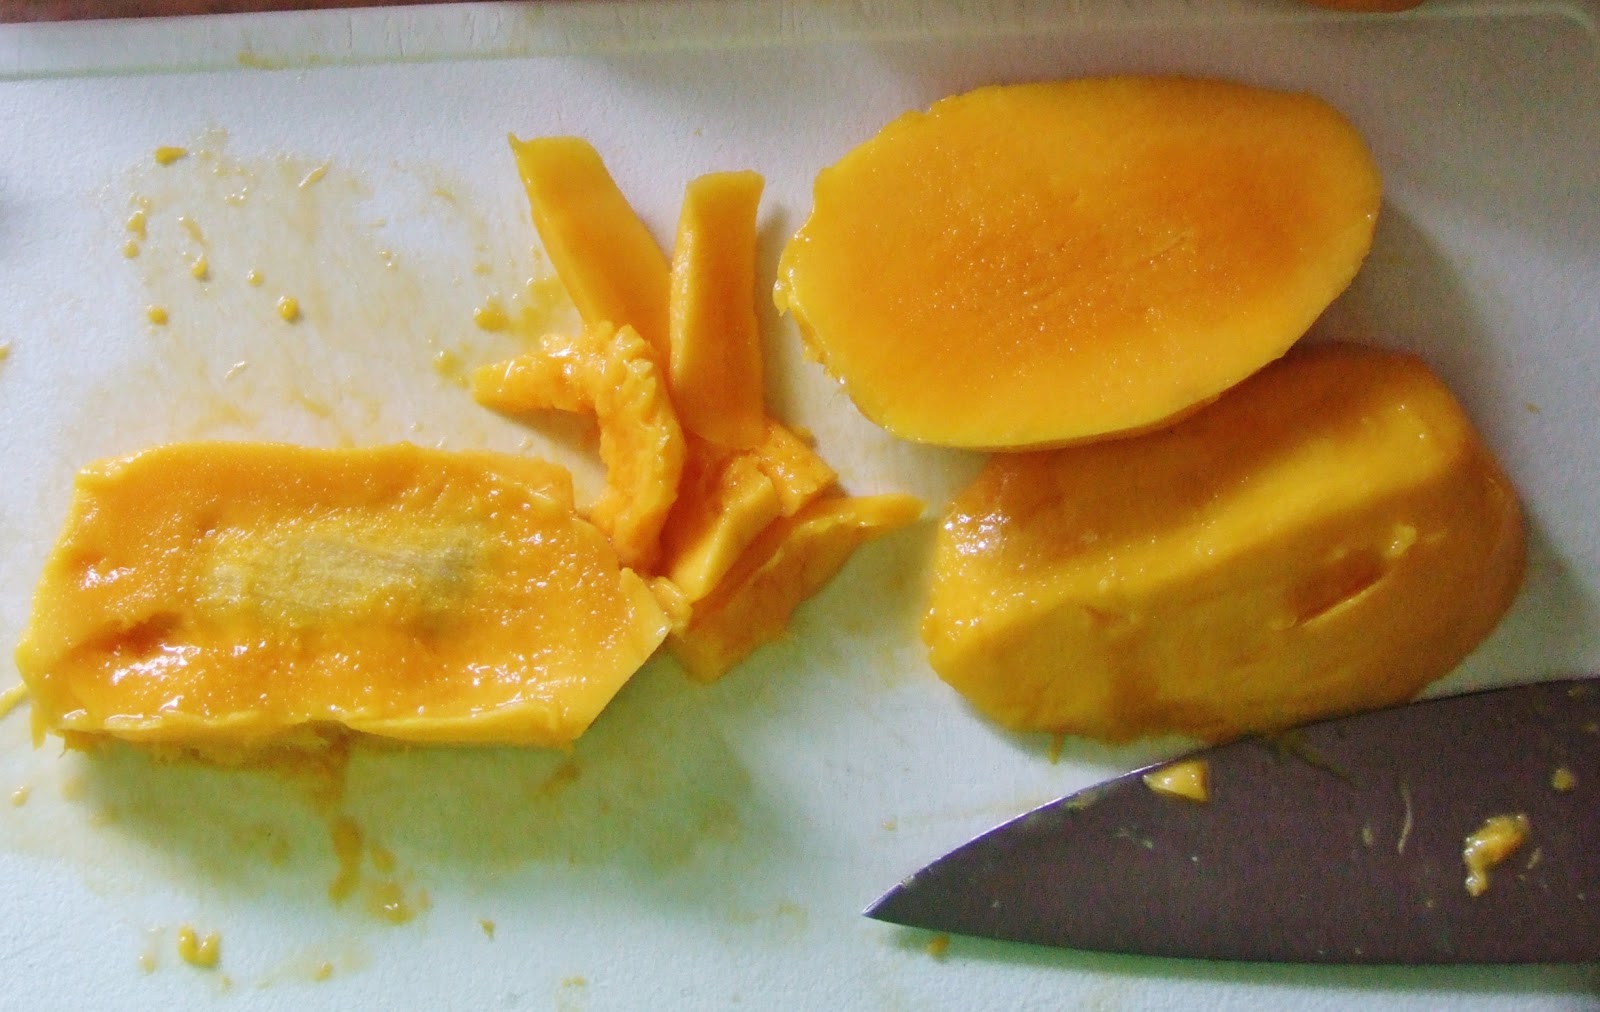 Easy Life Meal and Party Planning: How to Cut and Freeze a Mango